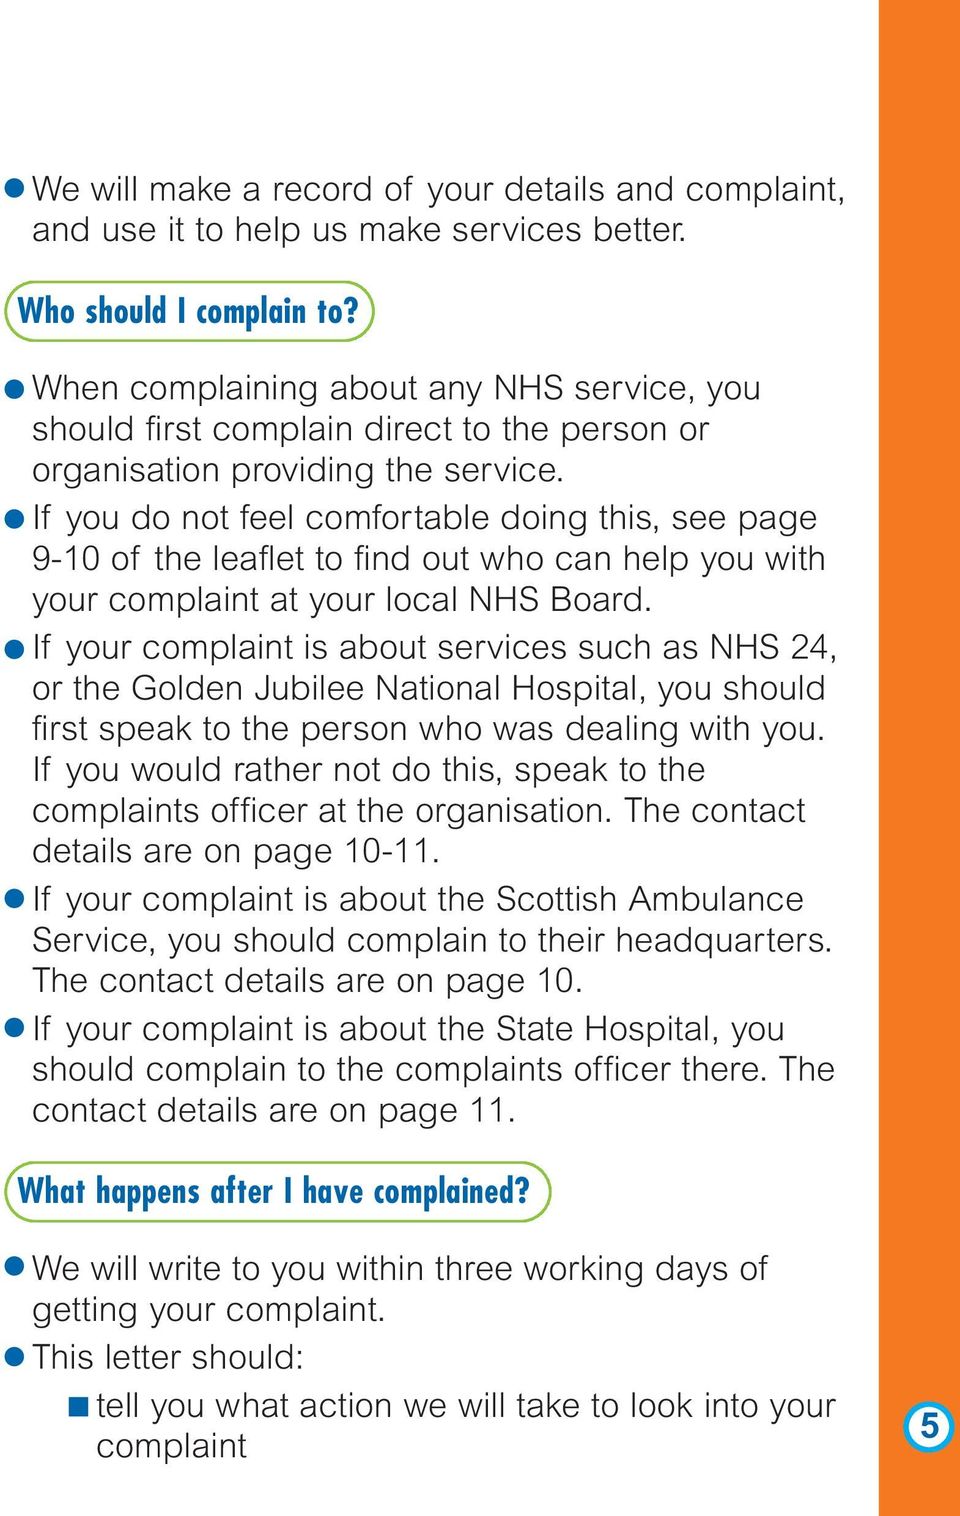 If you do not feel comfortable doing this, see page 9-10 of the leaflet to find out who can help you with your complaint at your local NHS Board.